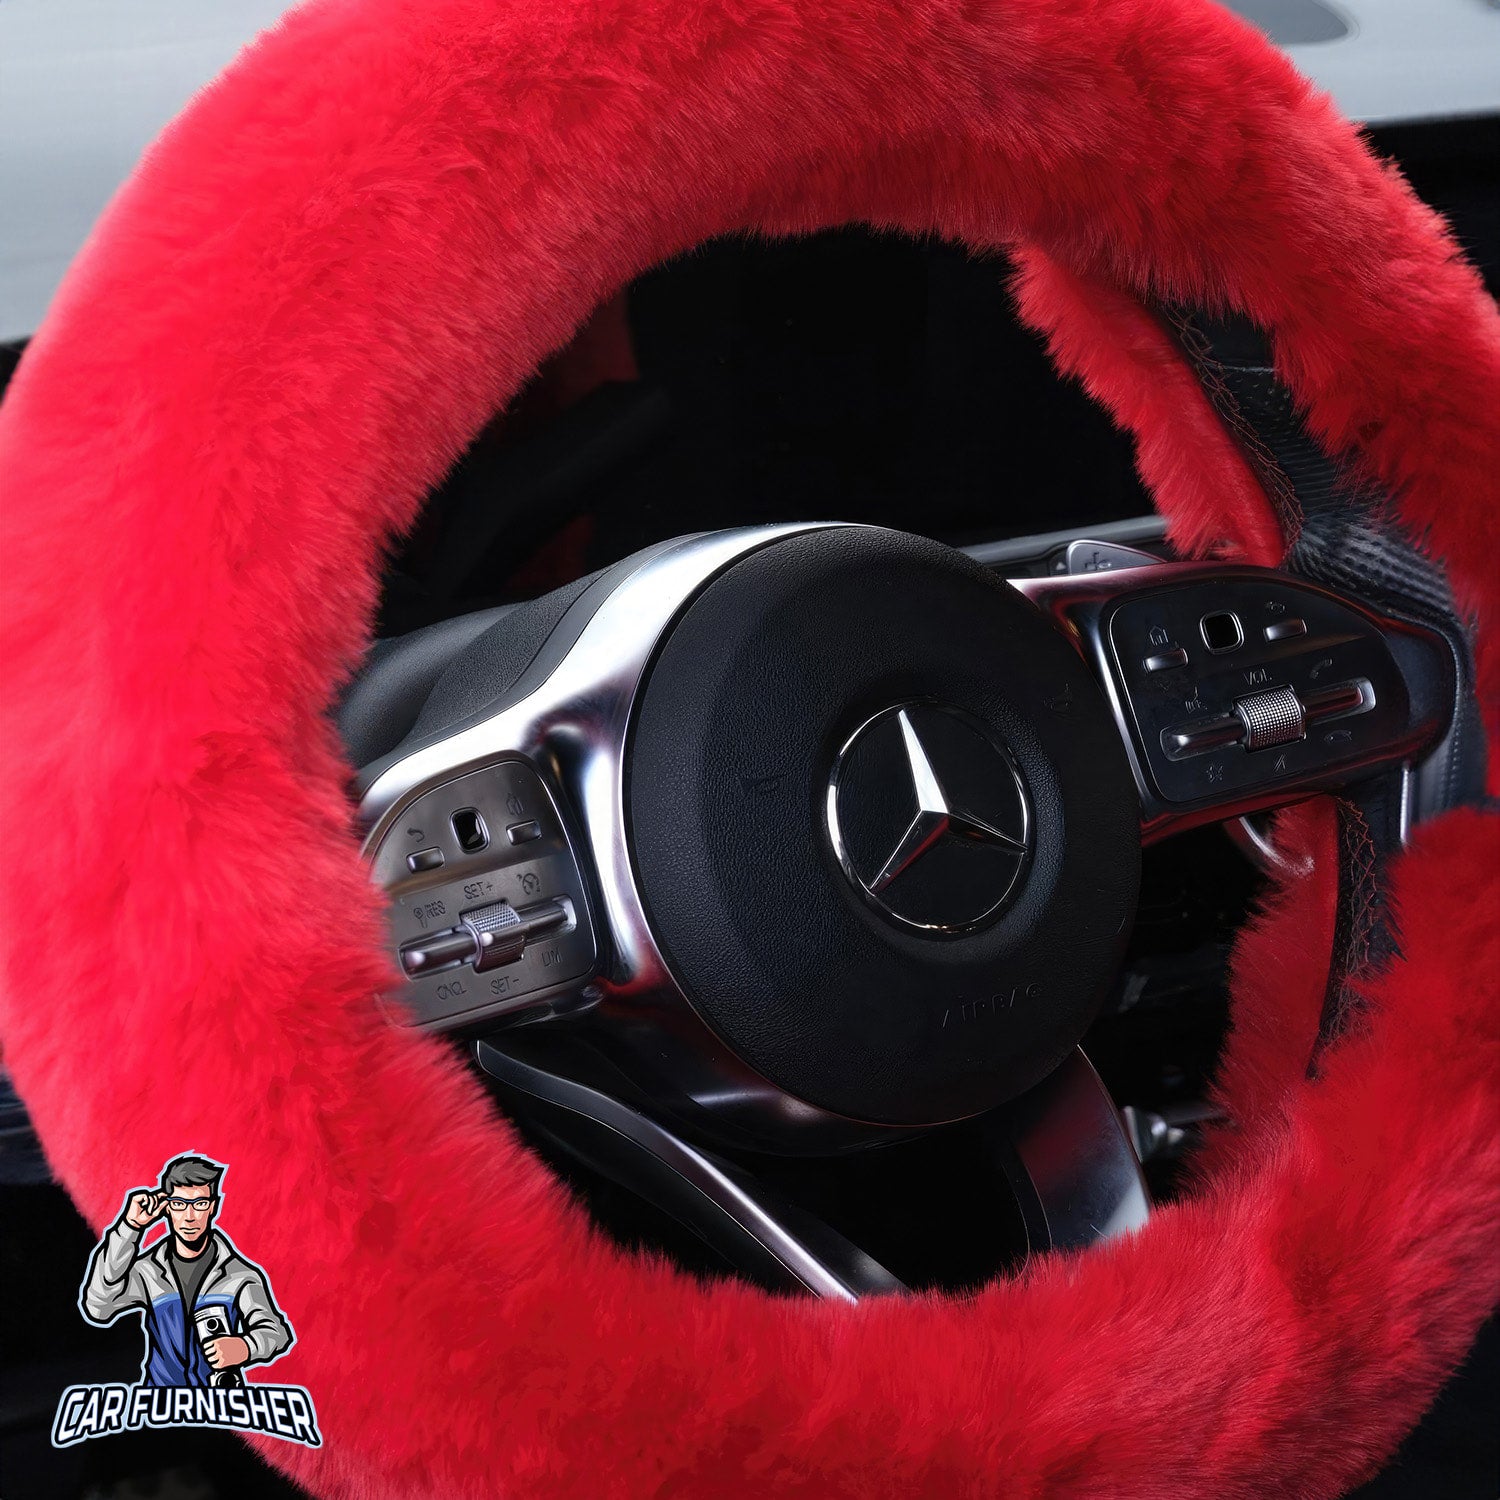 Fluffy Plush Steering Wheel Cover | Extra Soft Red Fabric